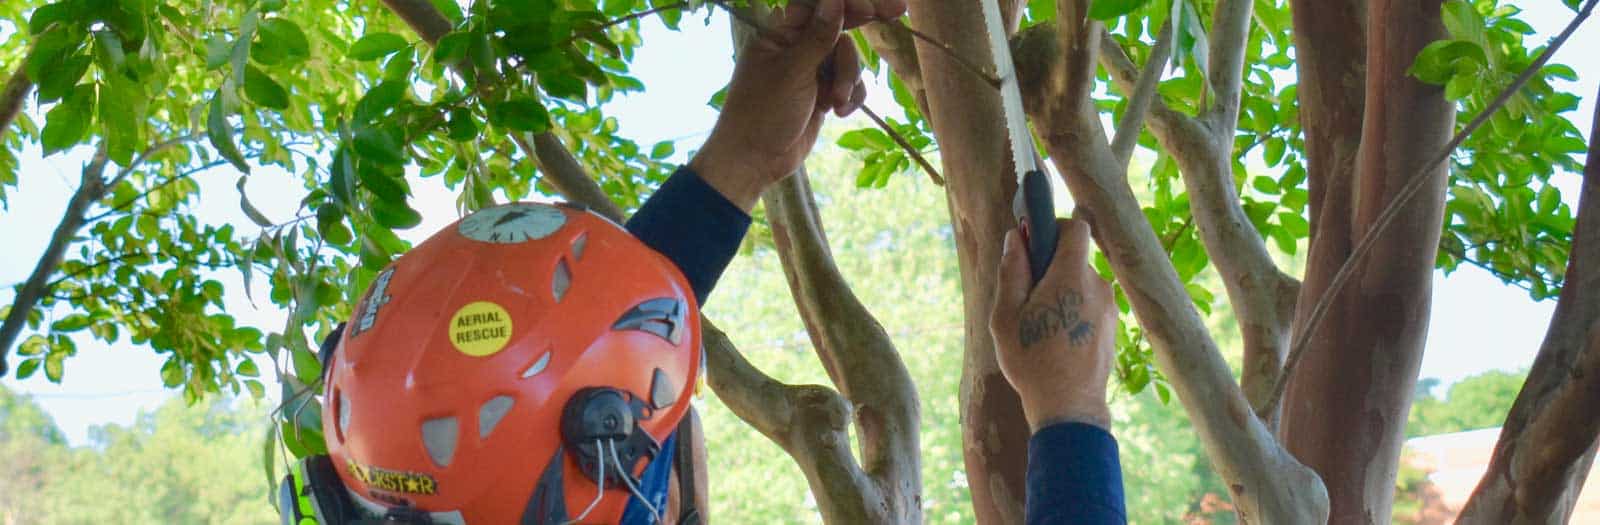 Man pruning branches